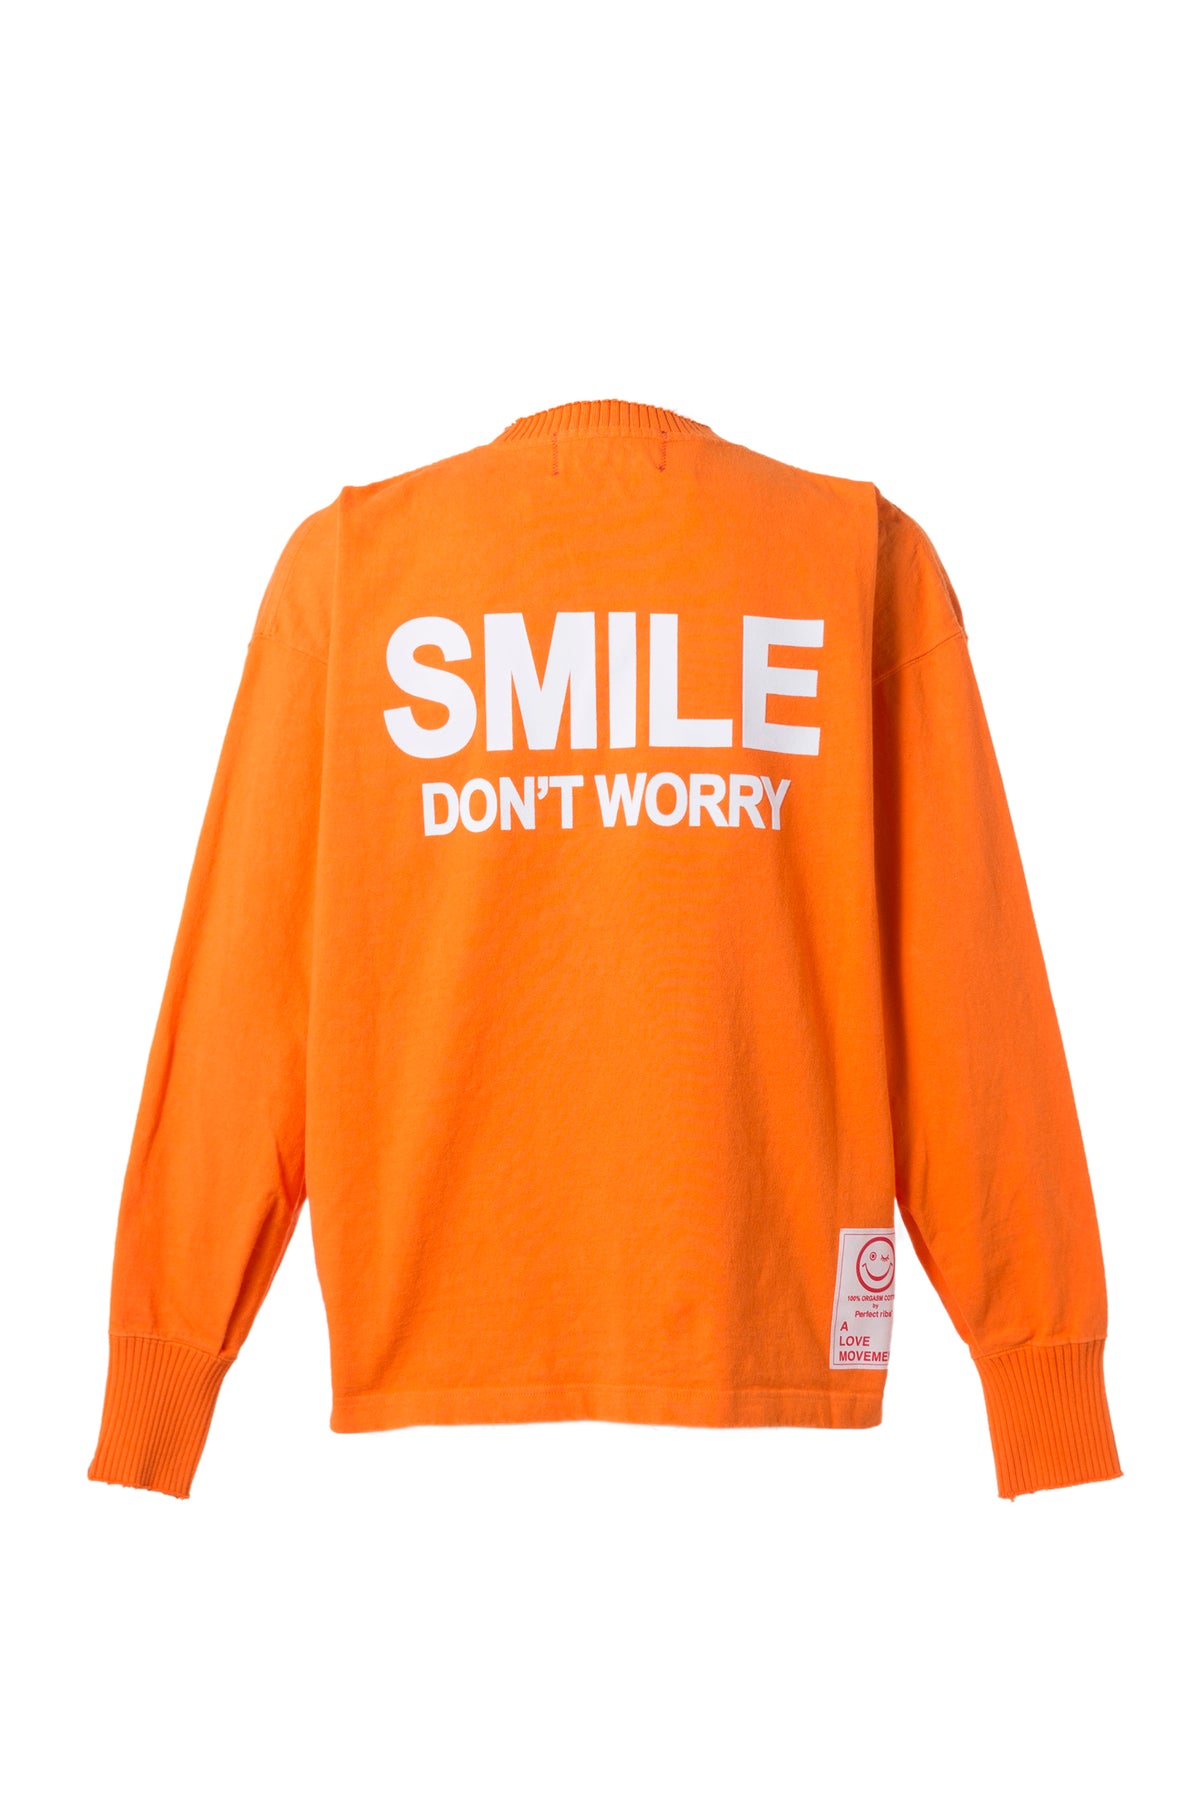 Perfect ribs BASIC LONG SLEEVE T-SHIRTS "SMILE DON'T WORRY" / ORG